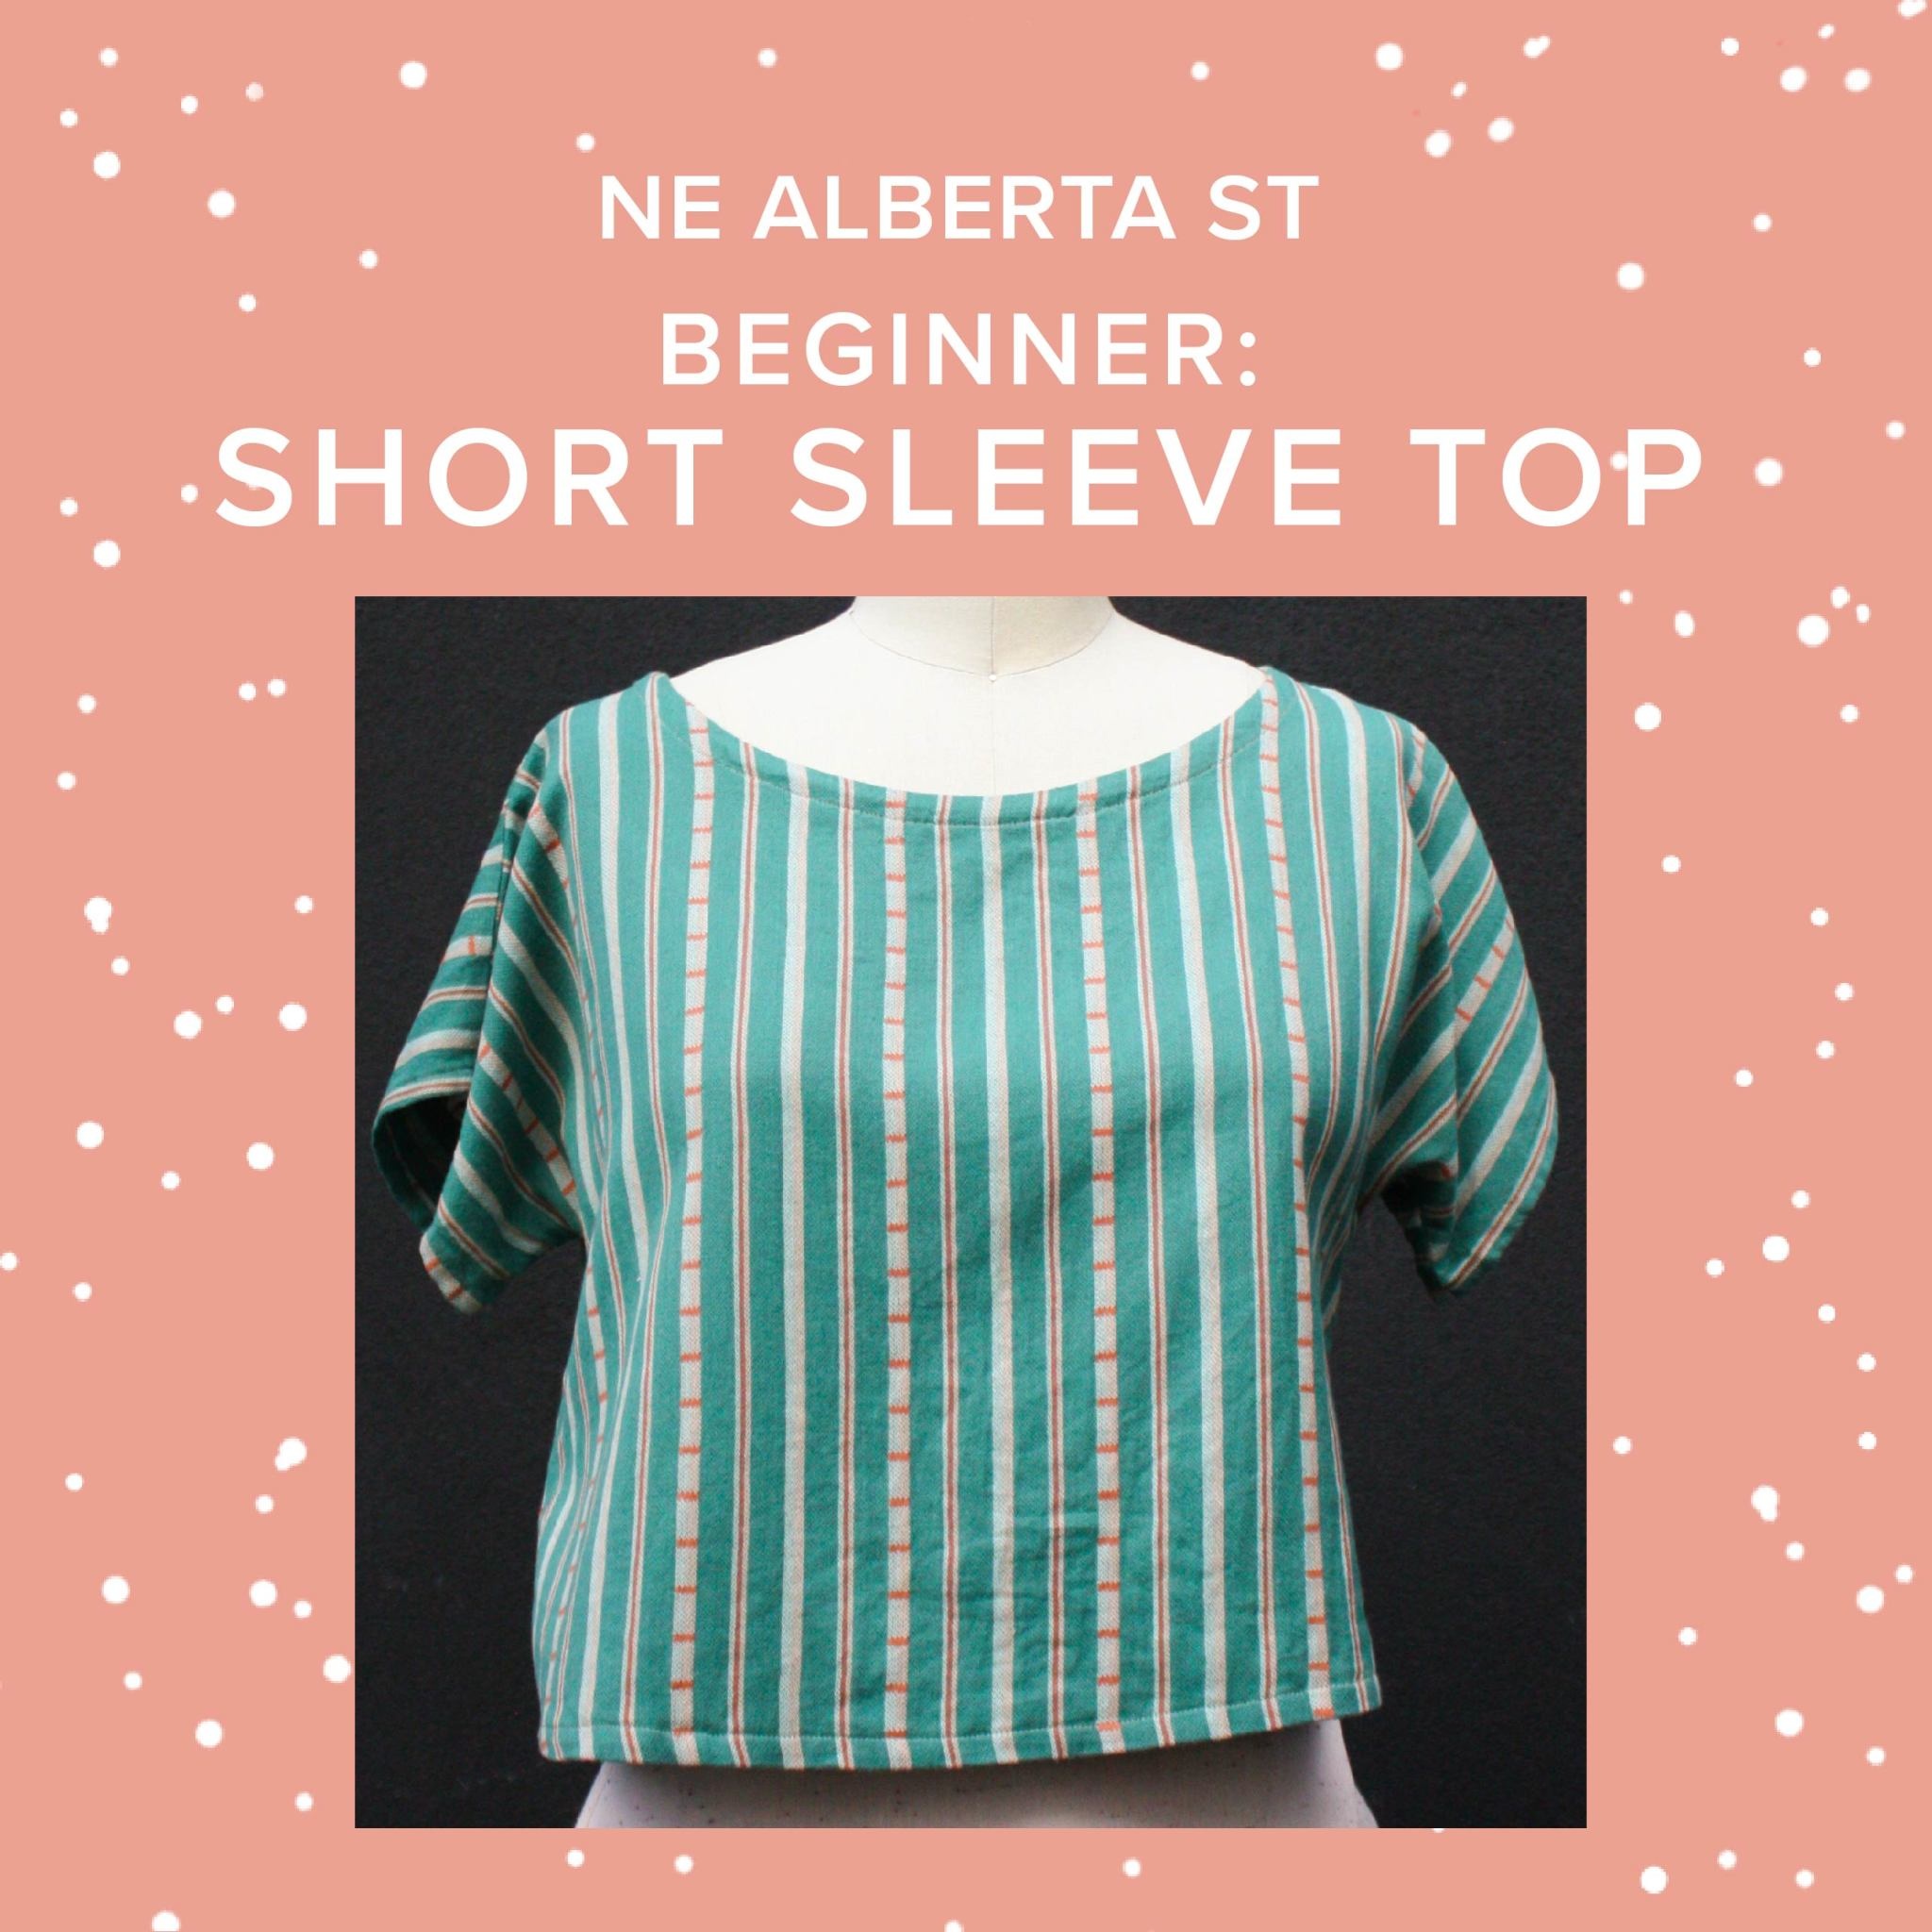 Colleen Connolly Beginner: Simple Short Sleeve Top, Mondays, June 24th & July 1st, 5:30pm-8:30pm